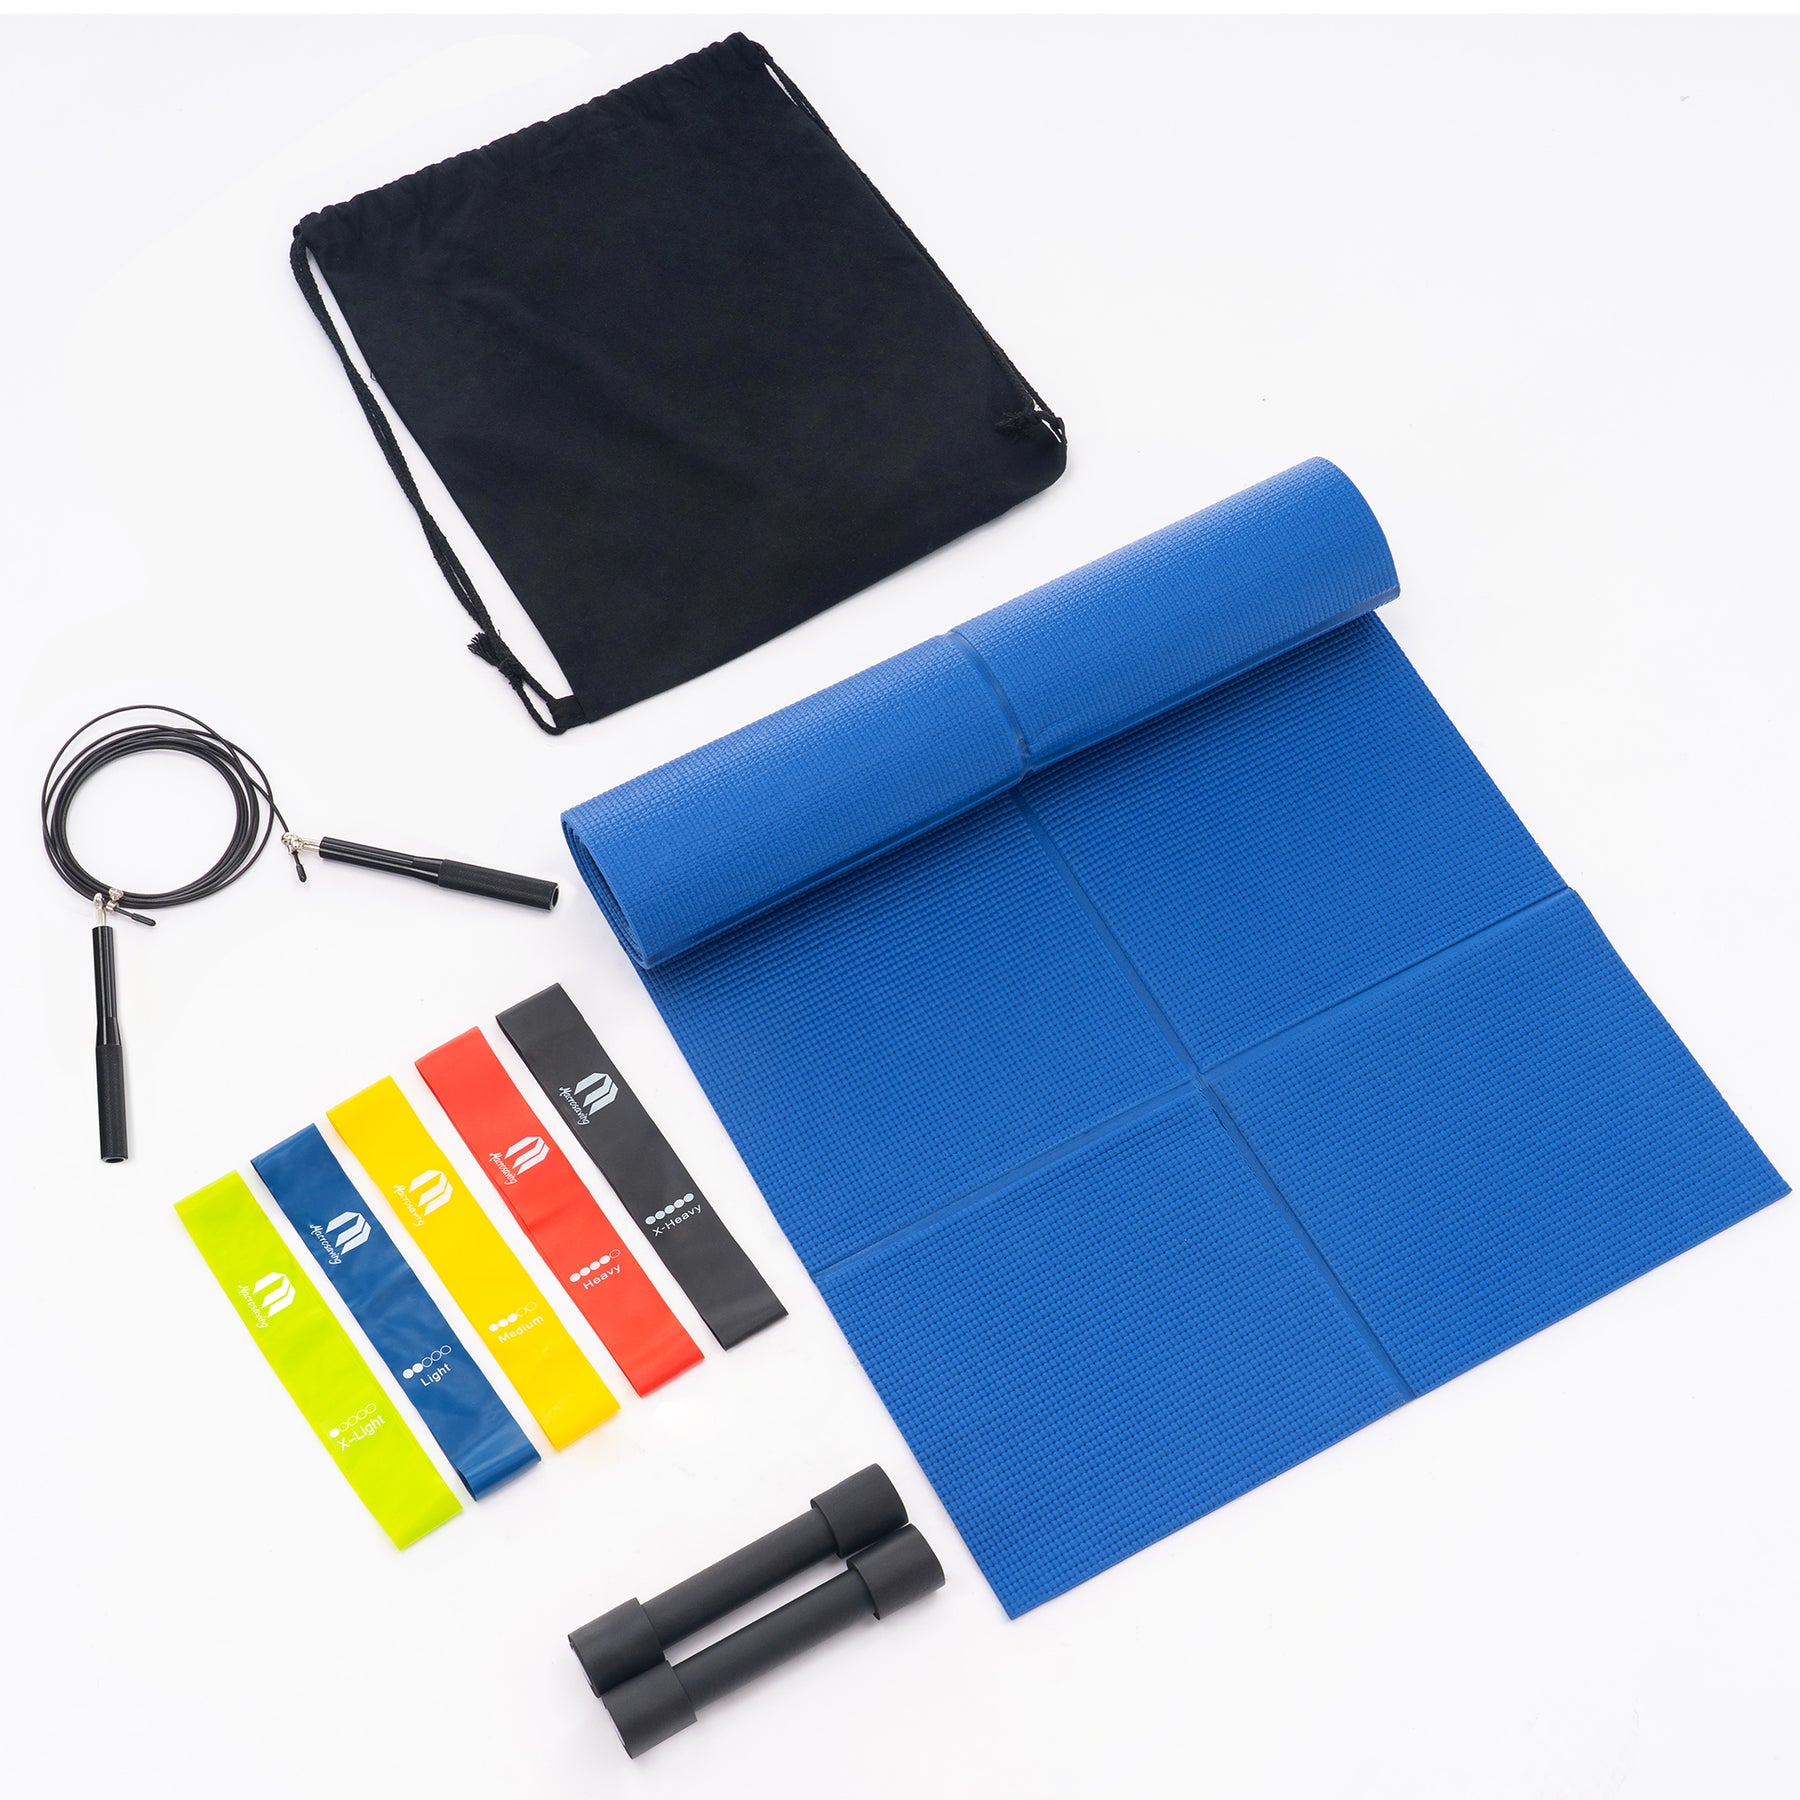 HemingWeigh Yoga Kit - Blue Yoga Mat Set Includes Carrying Strap, Yoga  Blocks, Yoga Strap, and 2 Microfiber Yoga Towels - Yoga Gear and Accessories  for Beginners and Experienced Yogis : 